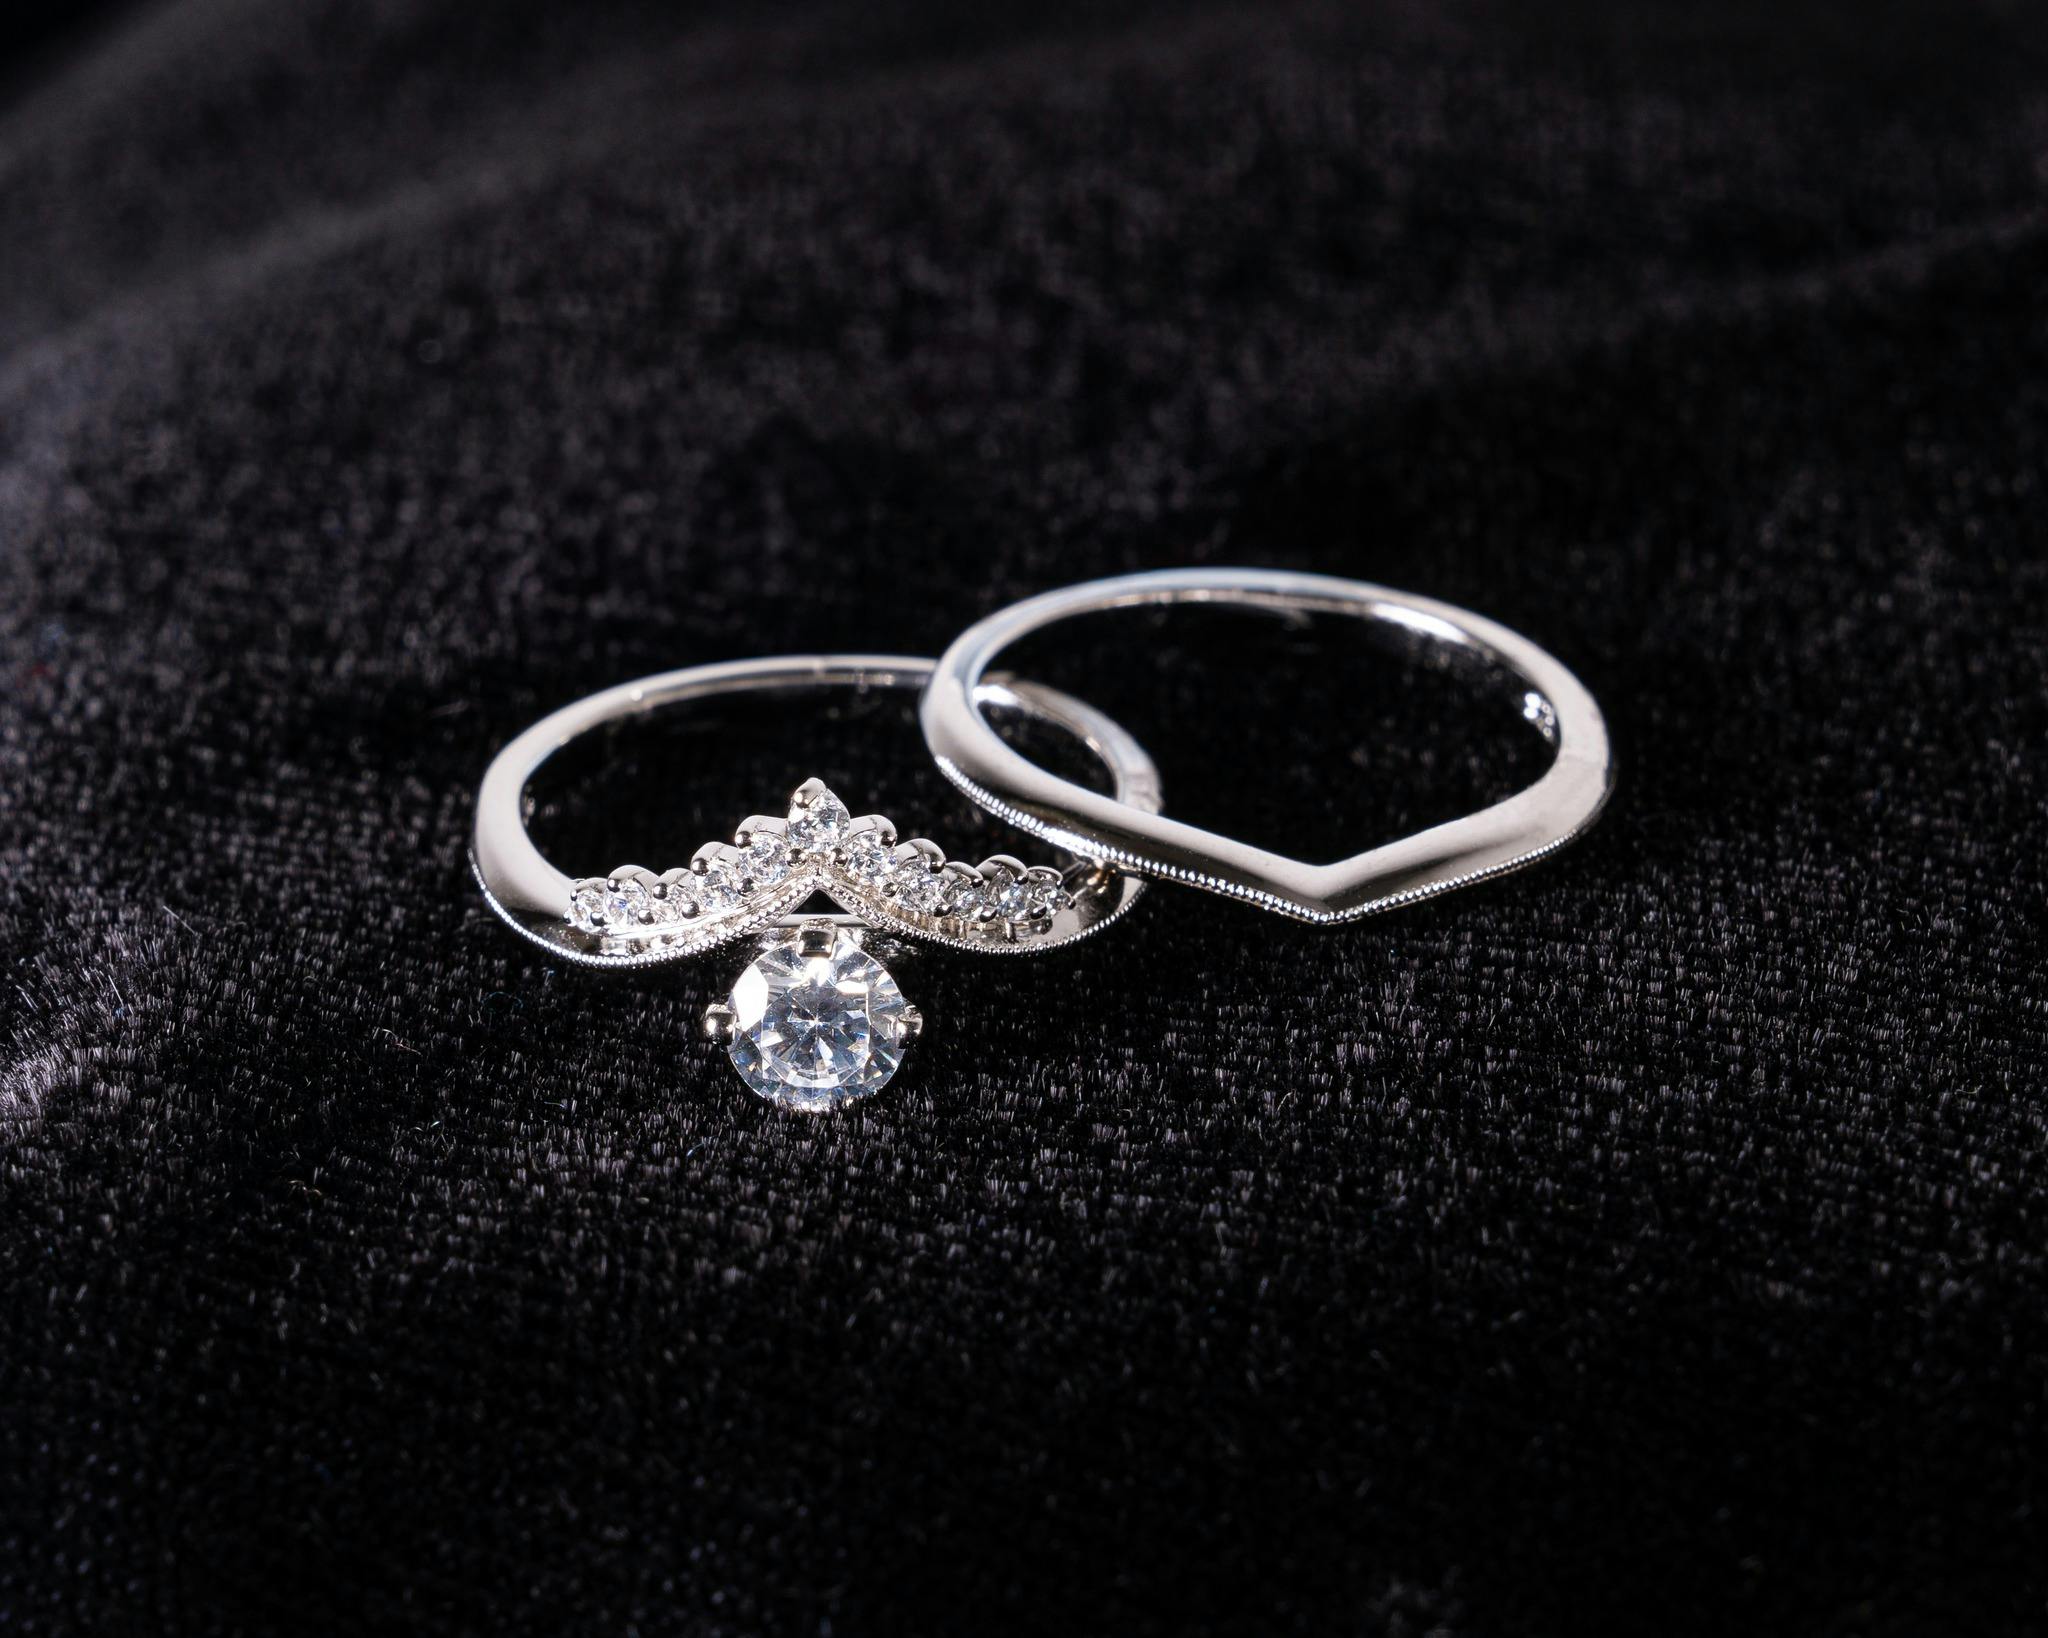 Clean solitare diamond engagement ring